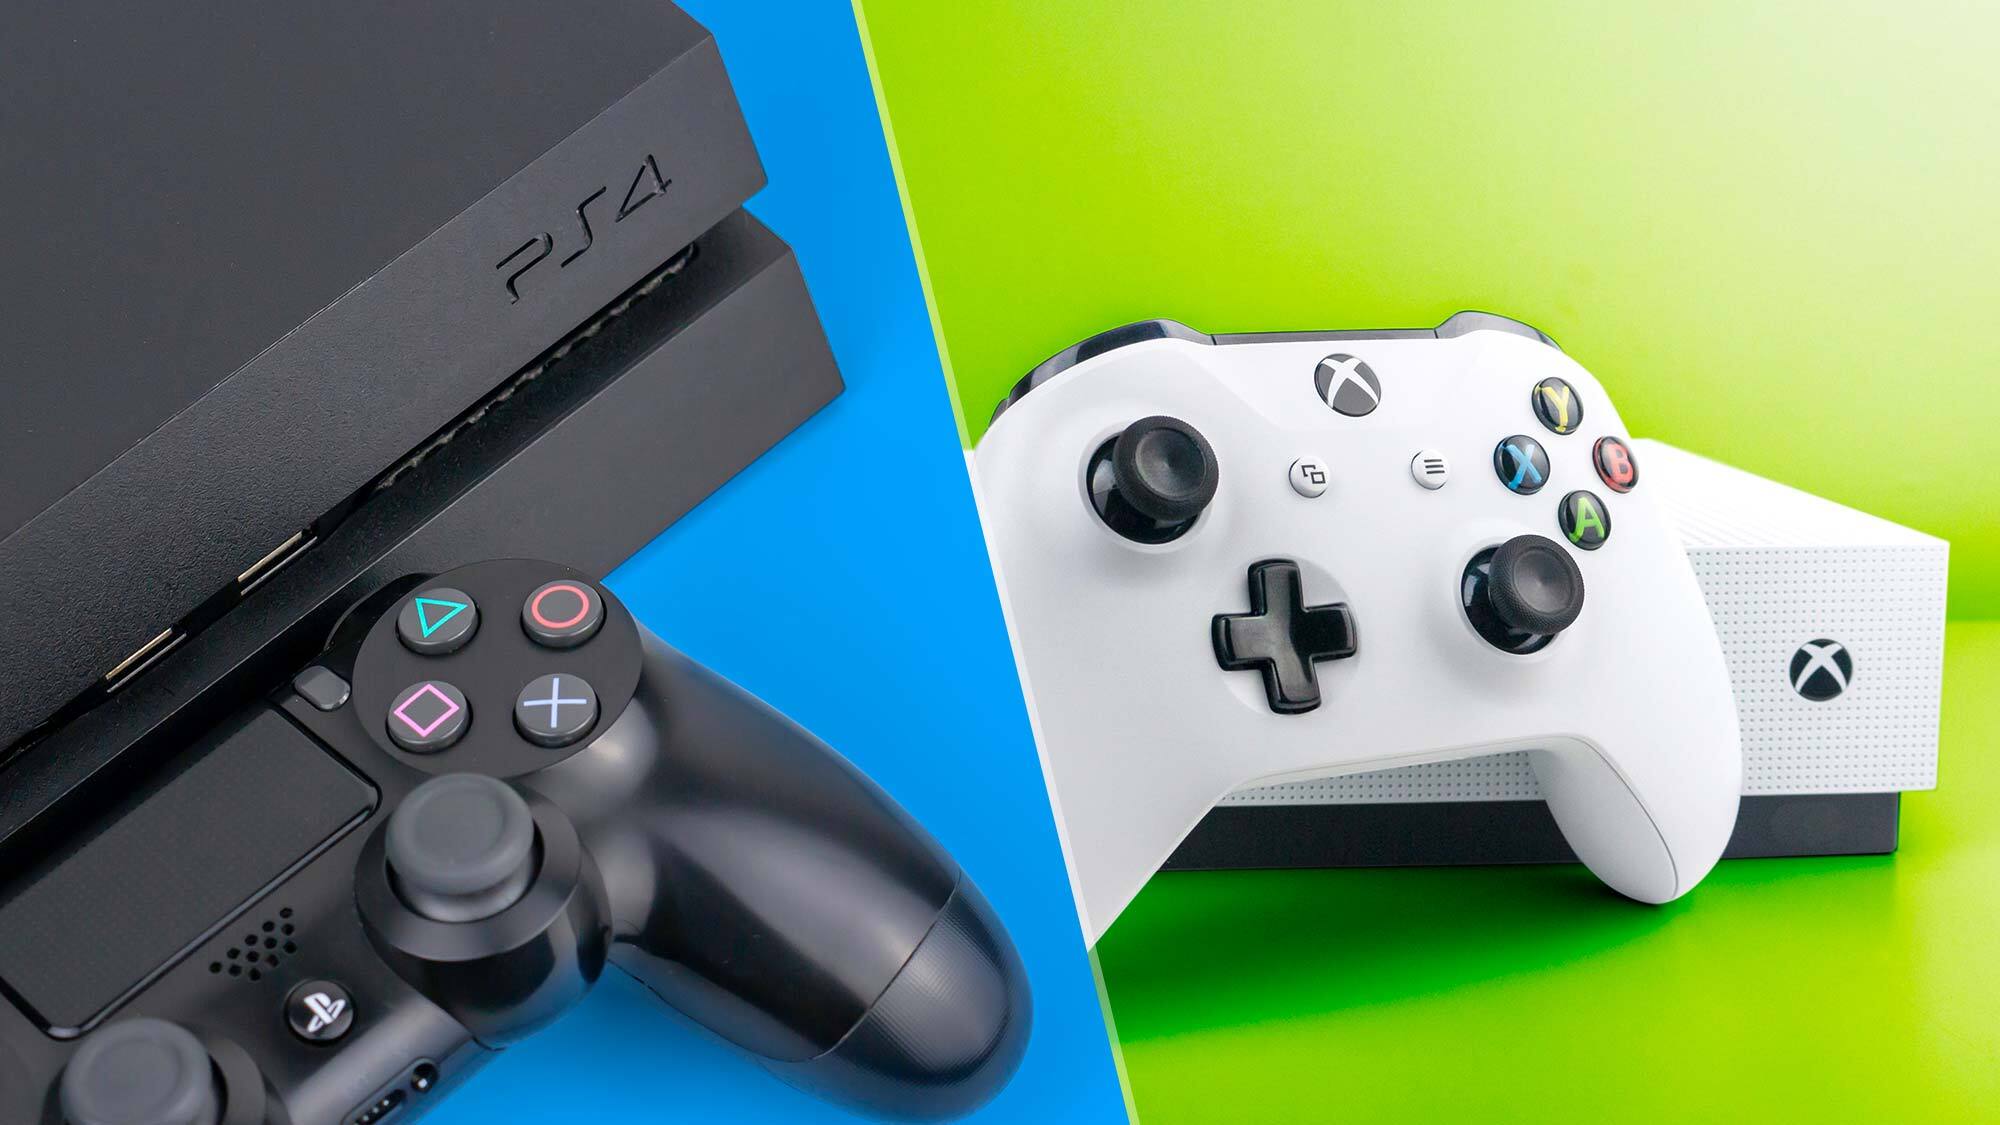 goedkeuren Artistiek Dubbelzinnigheid Xbox One vs PS4: Which console is right for you? | Tom's Guide